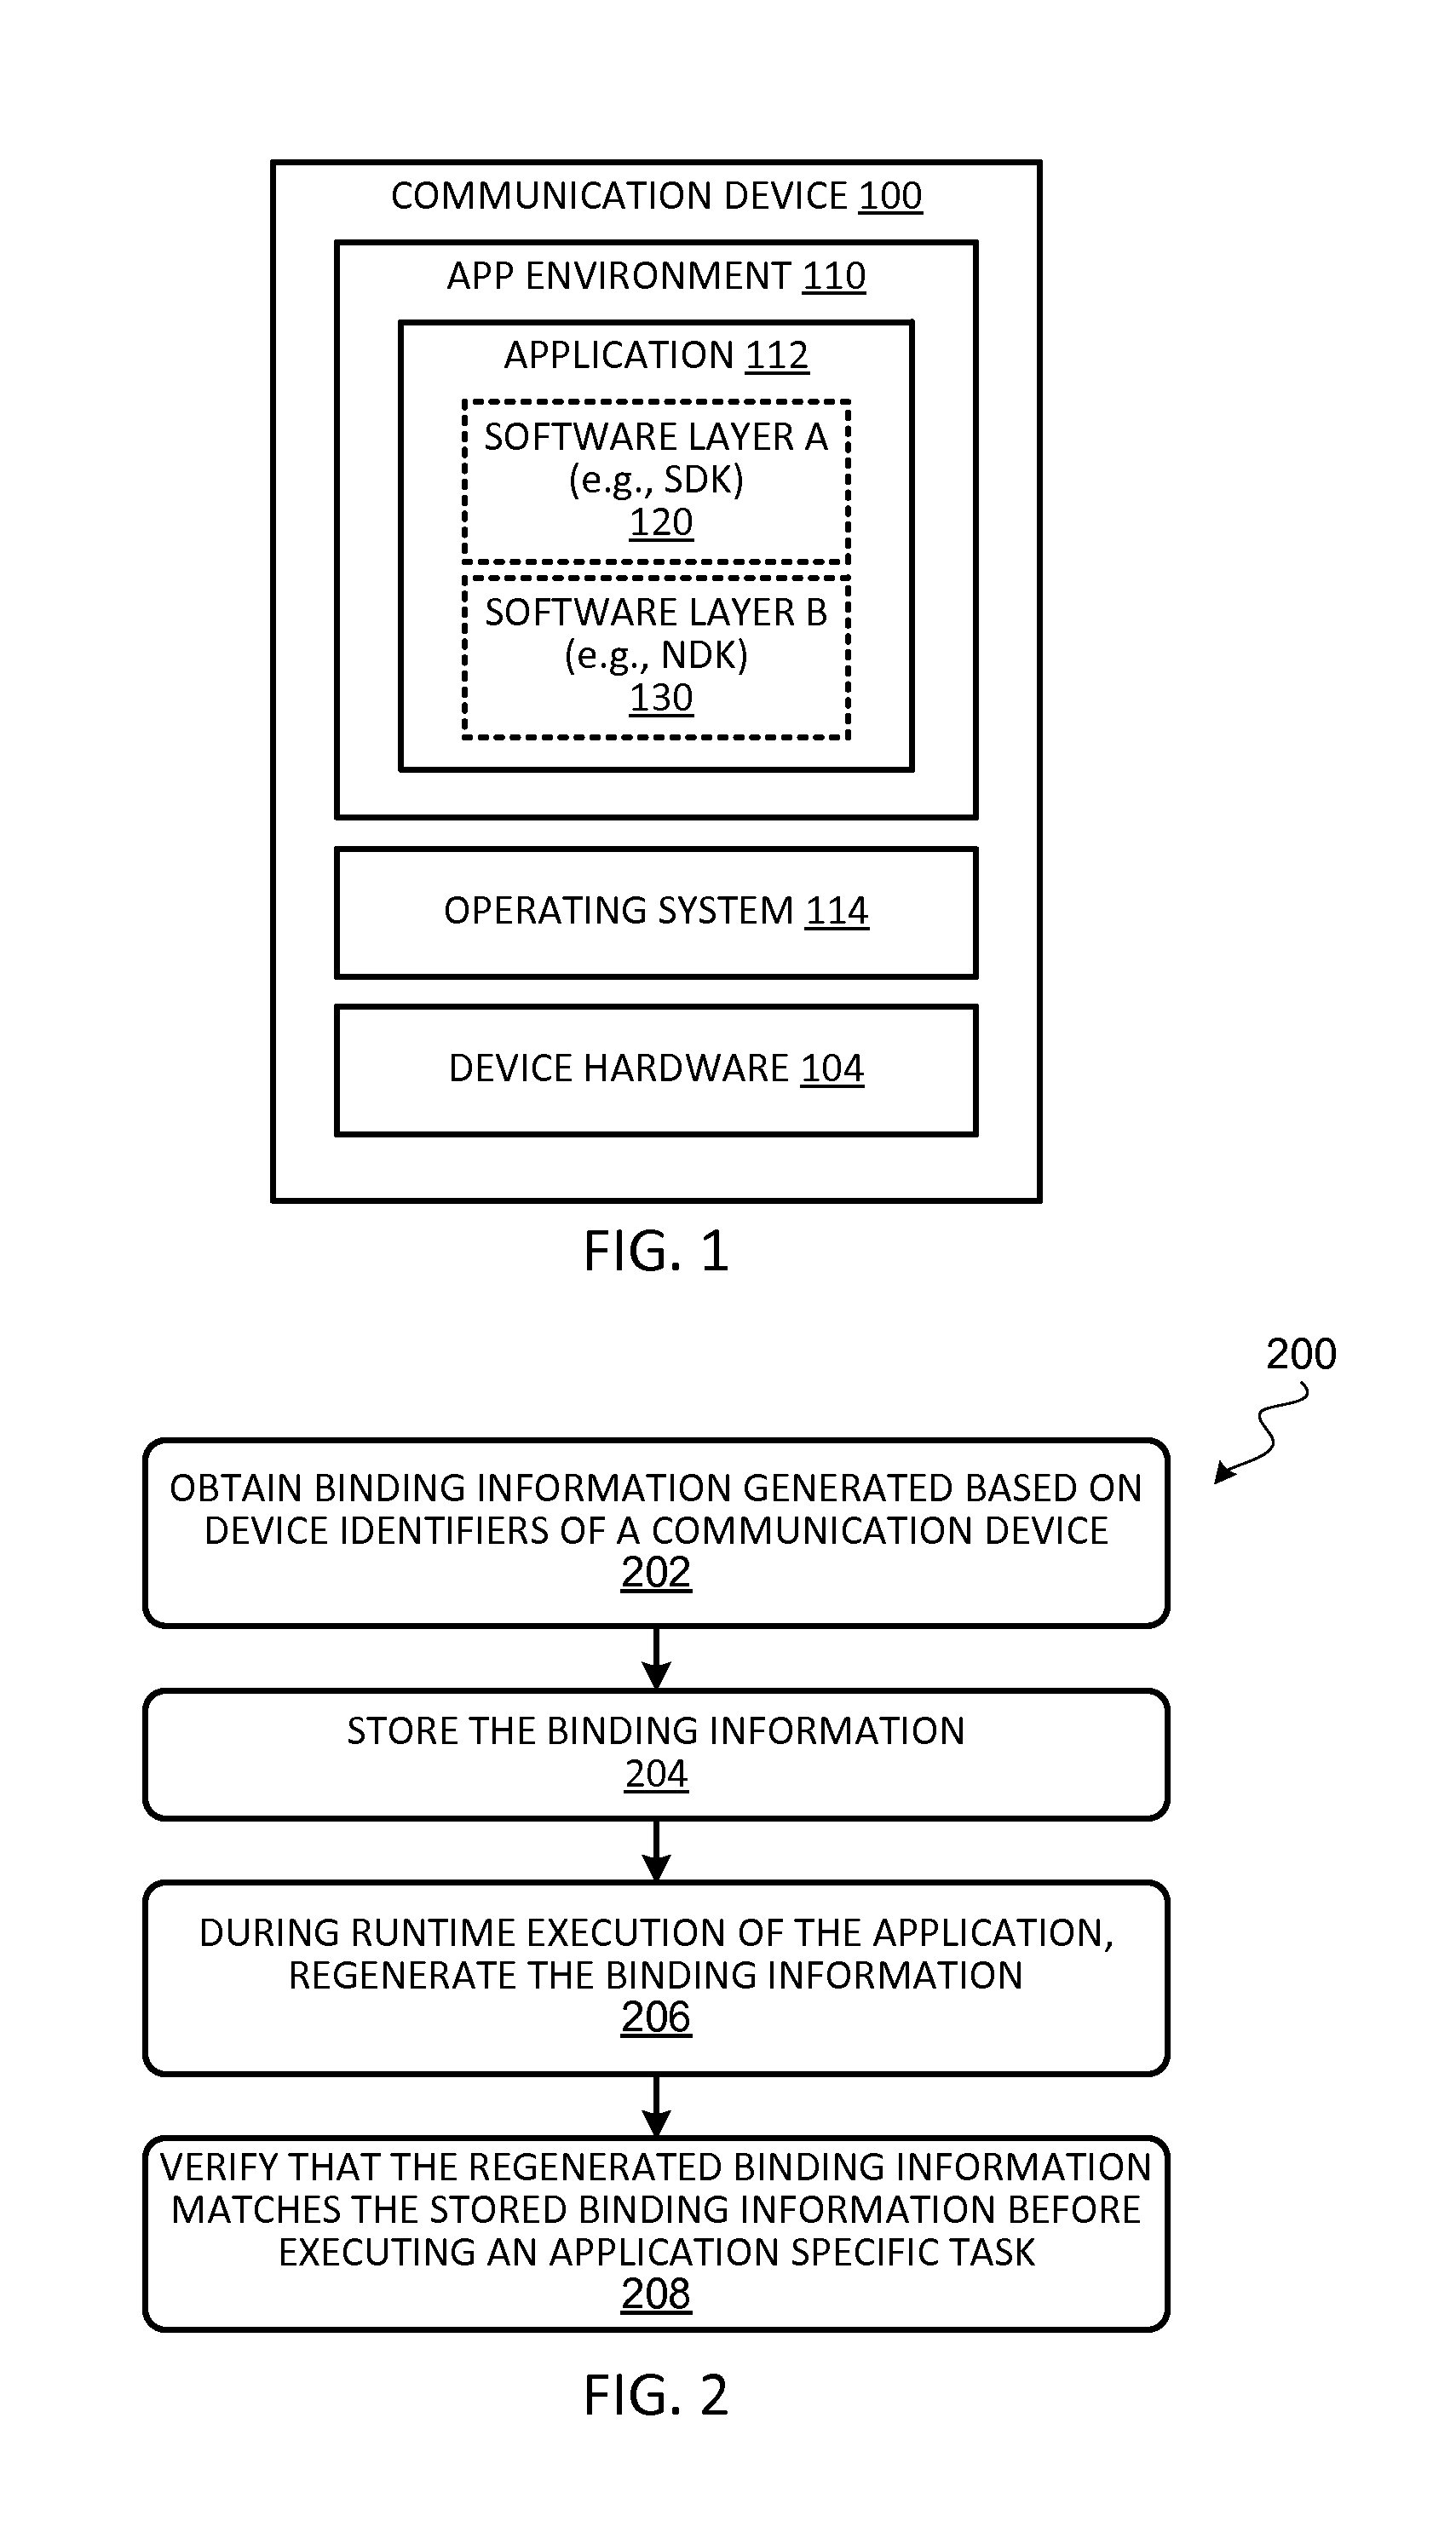 Secure binding of software application to communication device